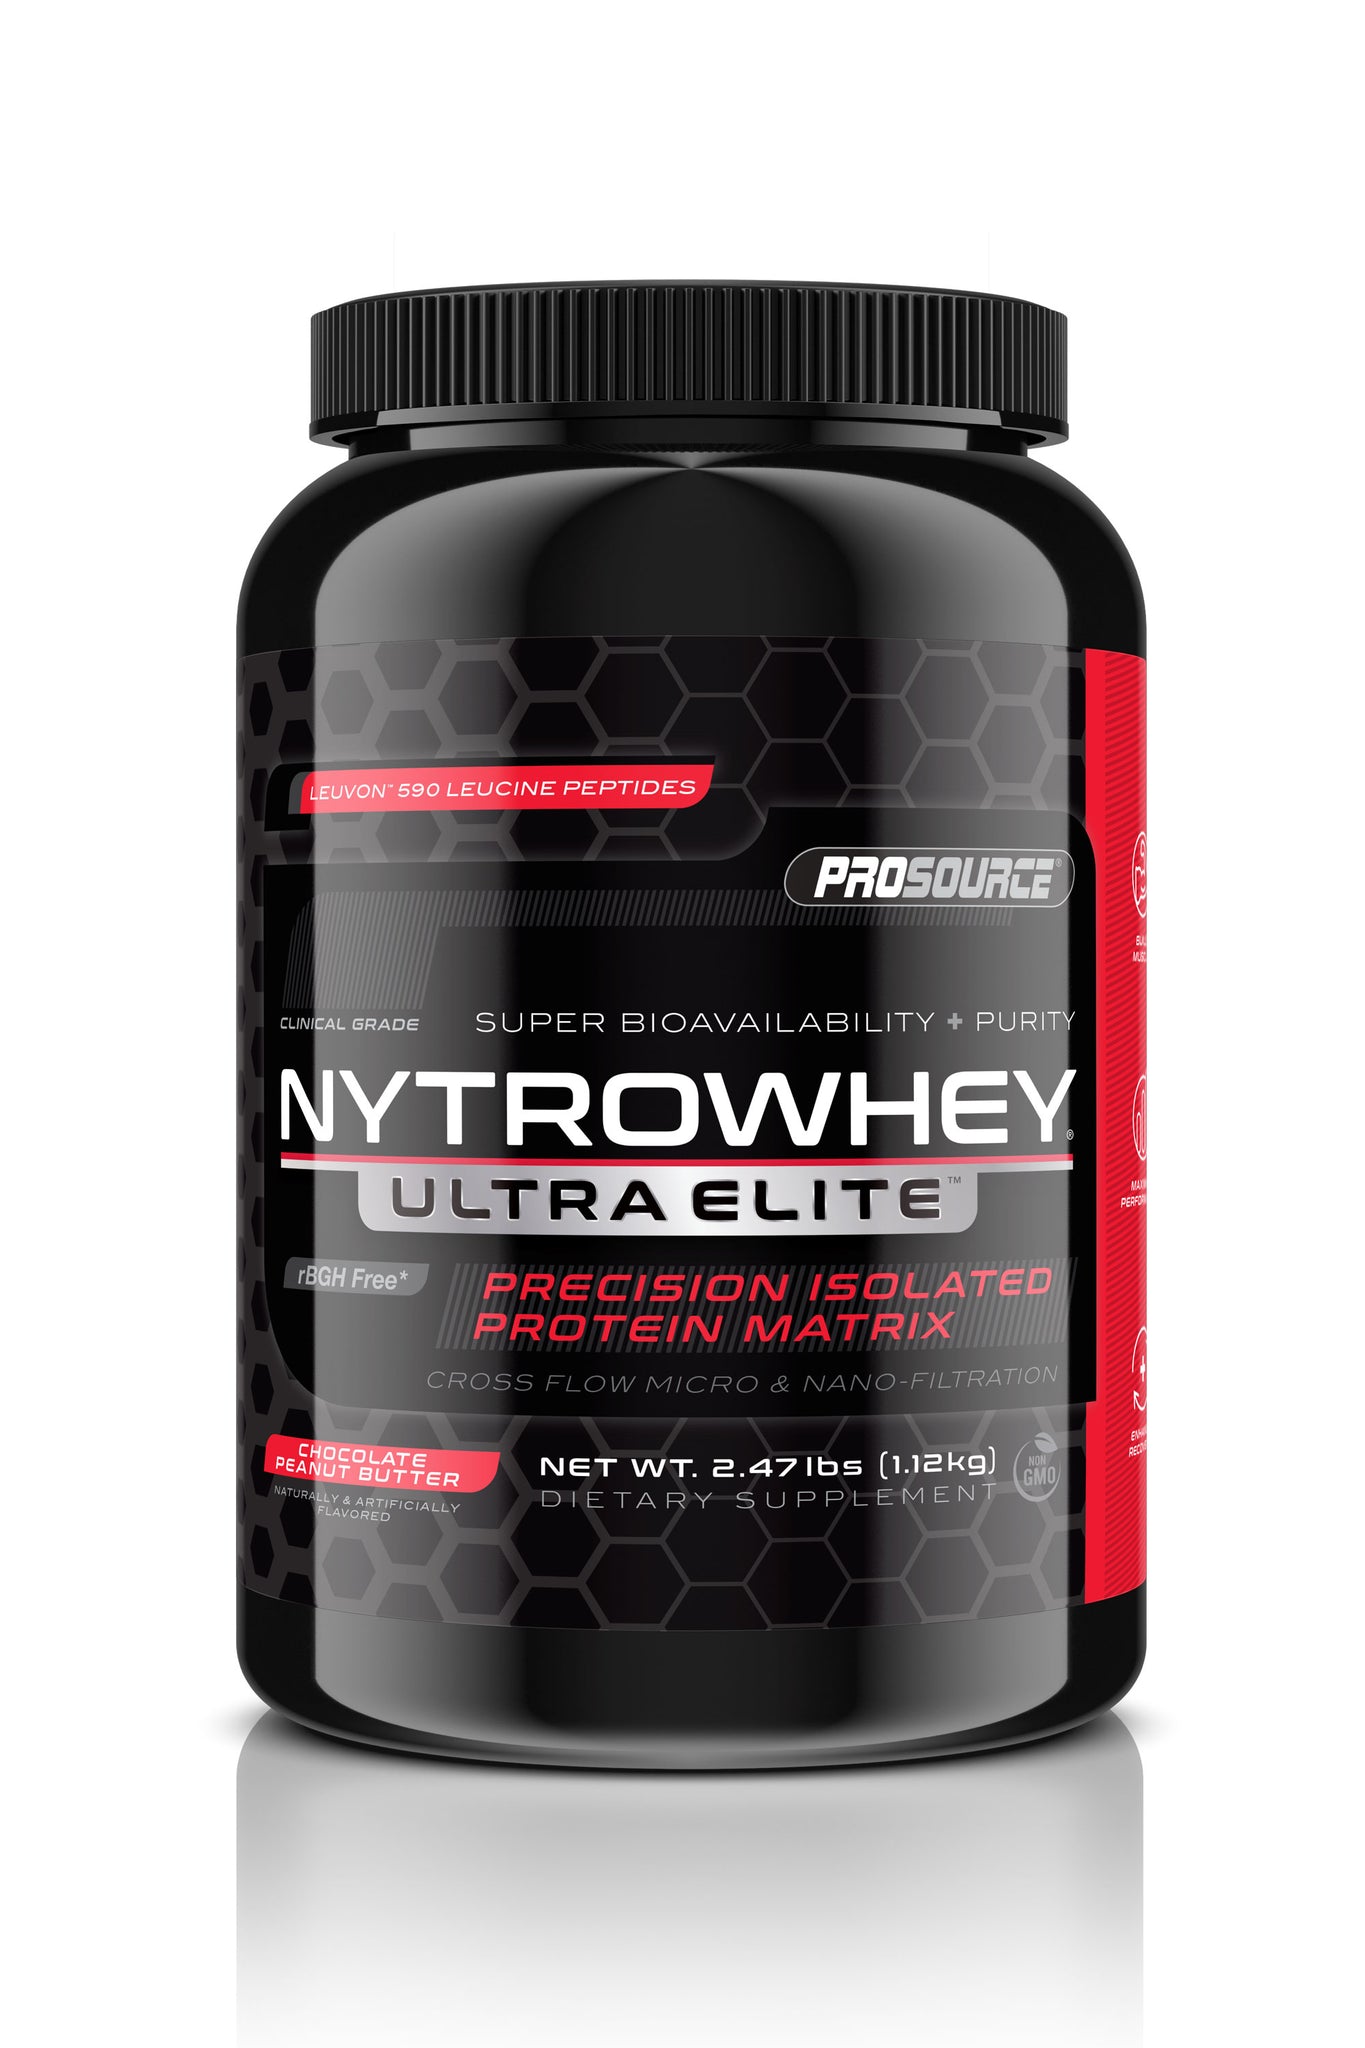 super bioavailability and purity cross flow micro and nano filtration prosource NytroWhey Ultra Elite precision isolated protein matrix leuvon 590 leucine peptides rBGH free net weight 2.47 lbs chocolate peanut butter 